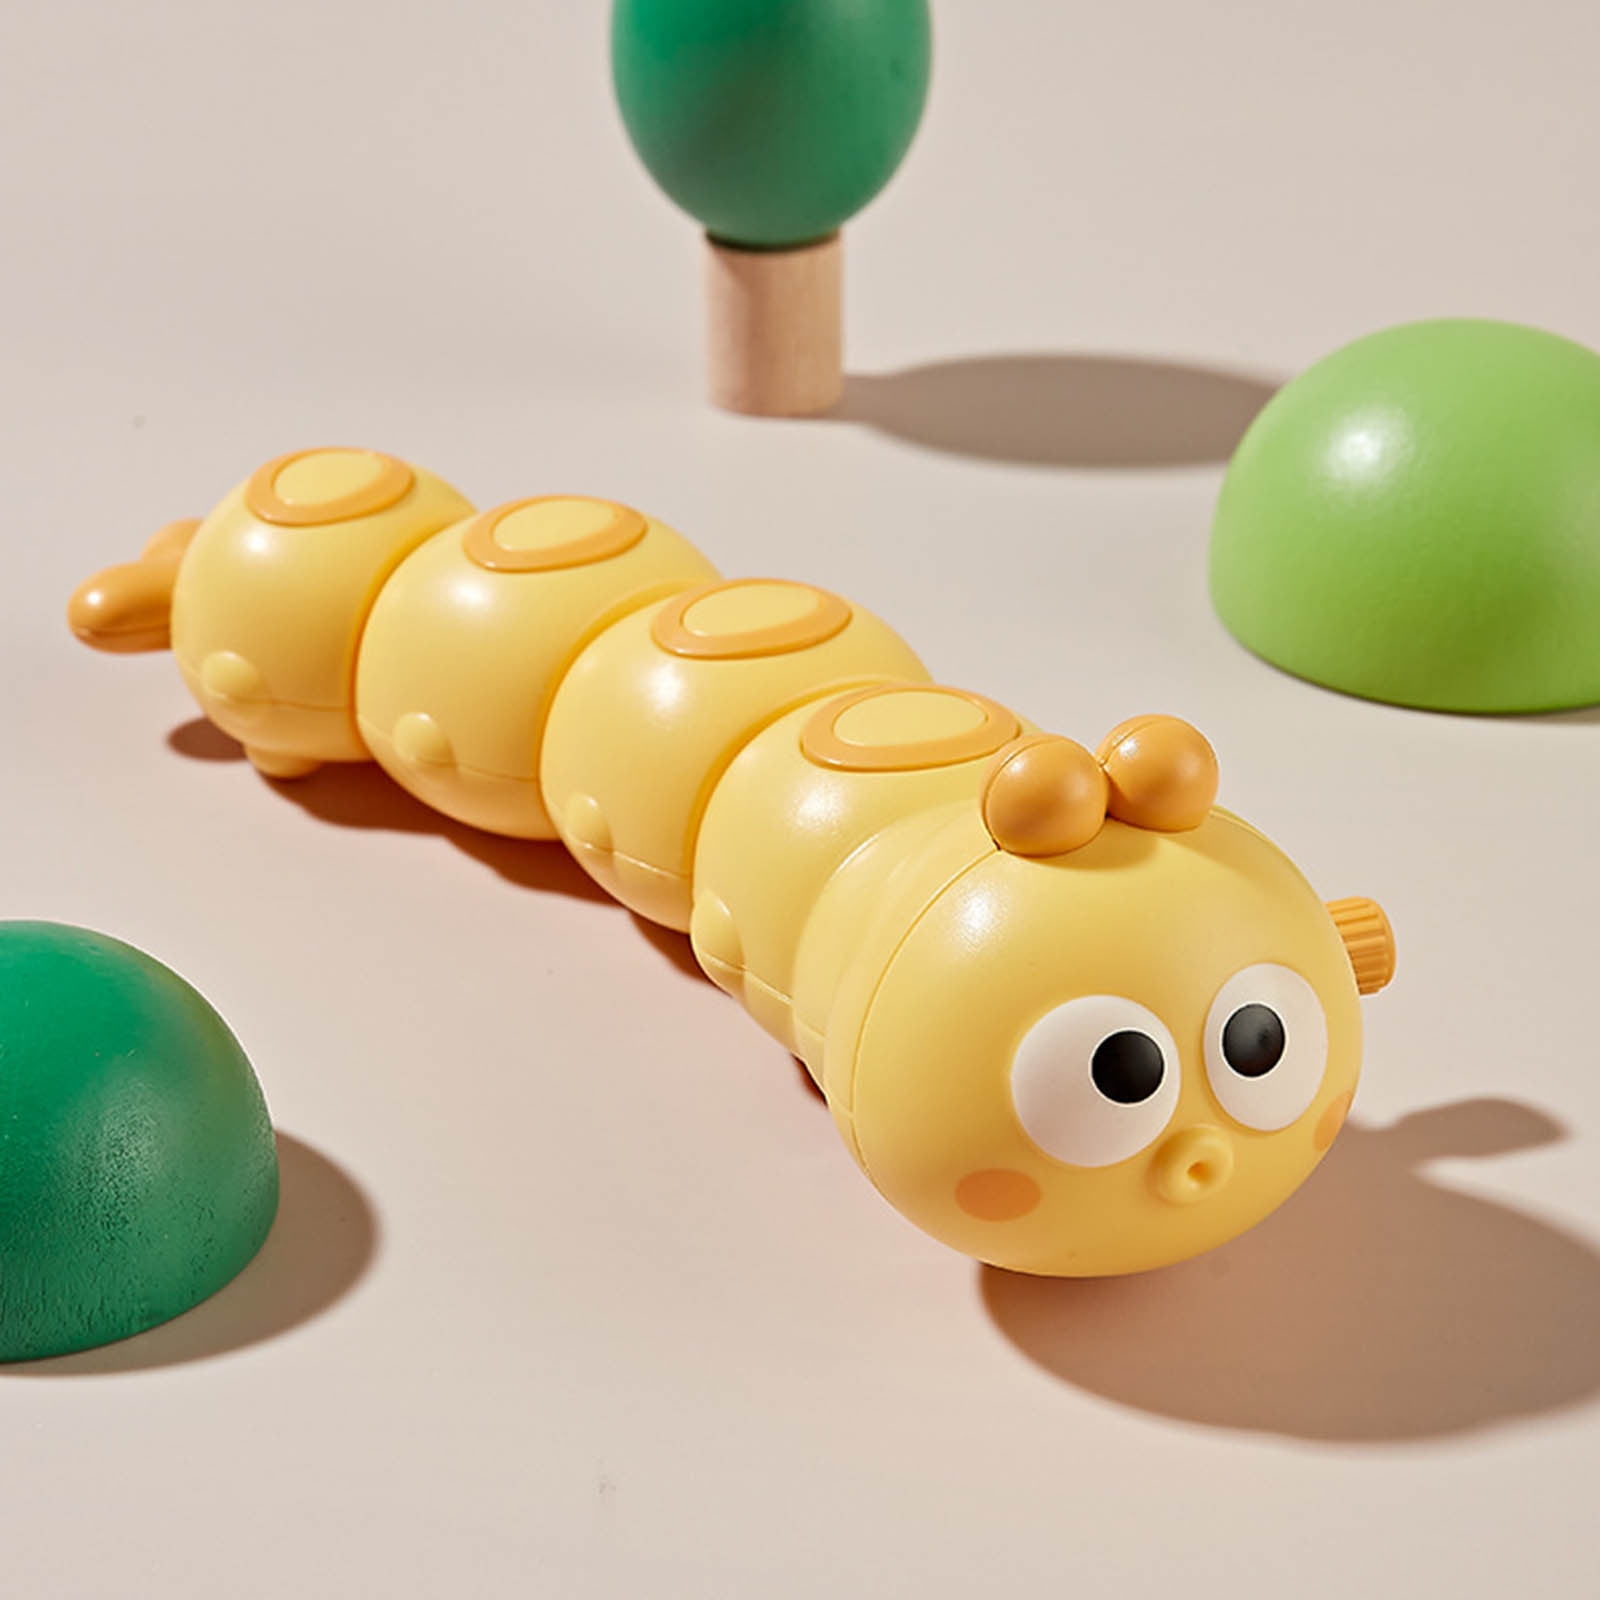 Toys & Games Children'S Wind Up Toy Top String Up Chain Caterpillar Sways Crawls  Can Move Can Run Animals Ygy | Walmart Canada